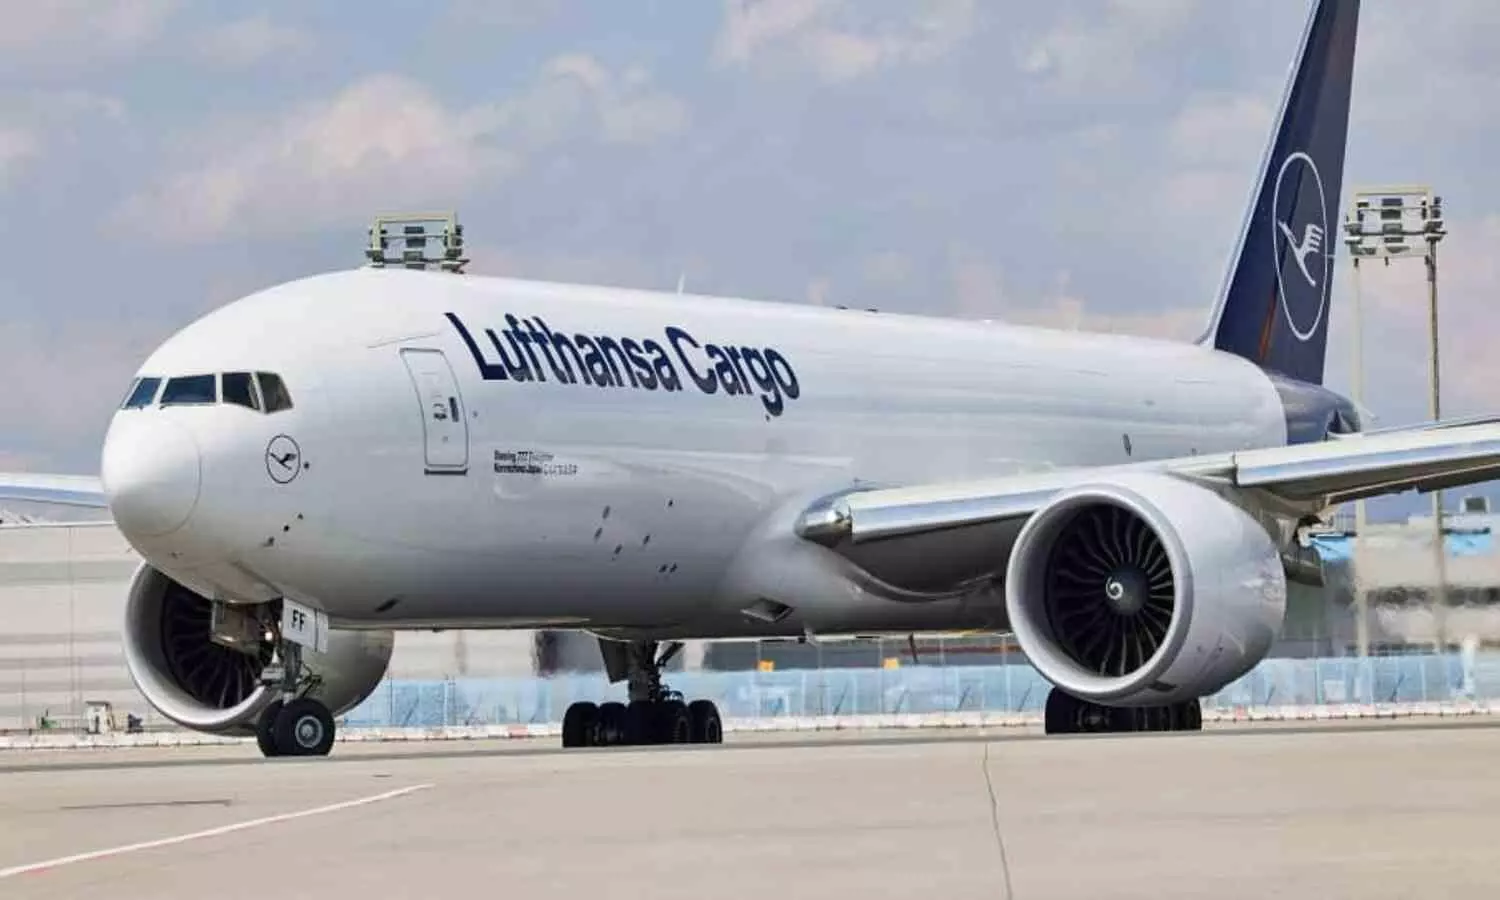 The last audit of Lufthansa Cargo took place in 2017